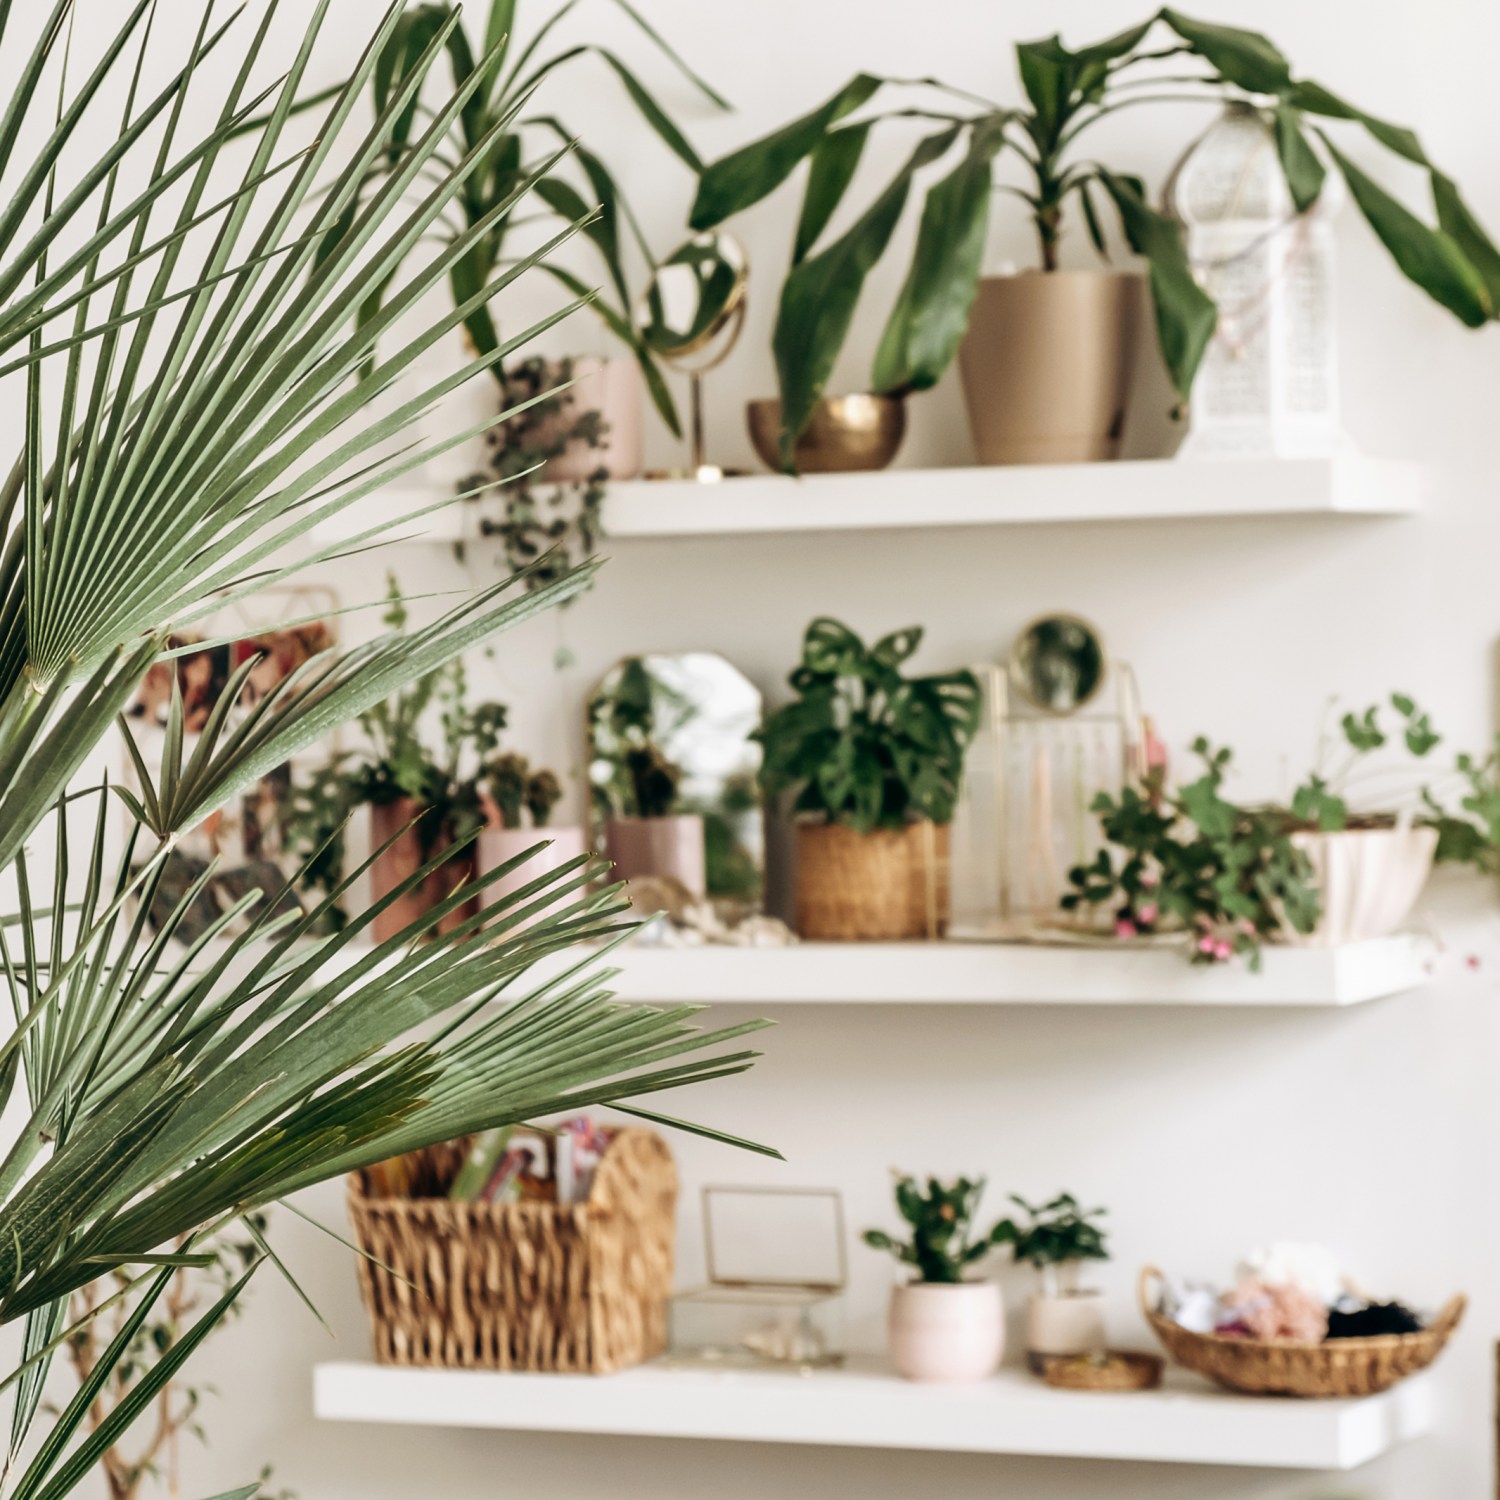 Variety of indoor house plants on wall shelves in a home with large plant in foreground show care